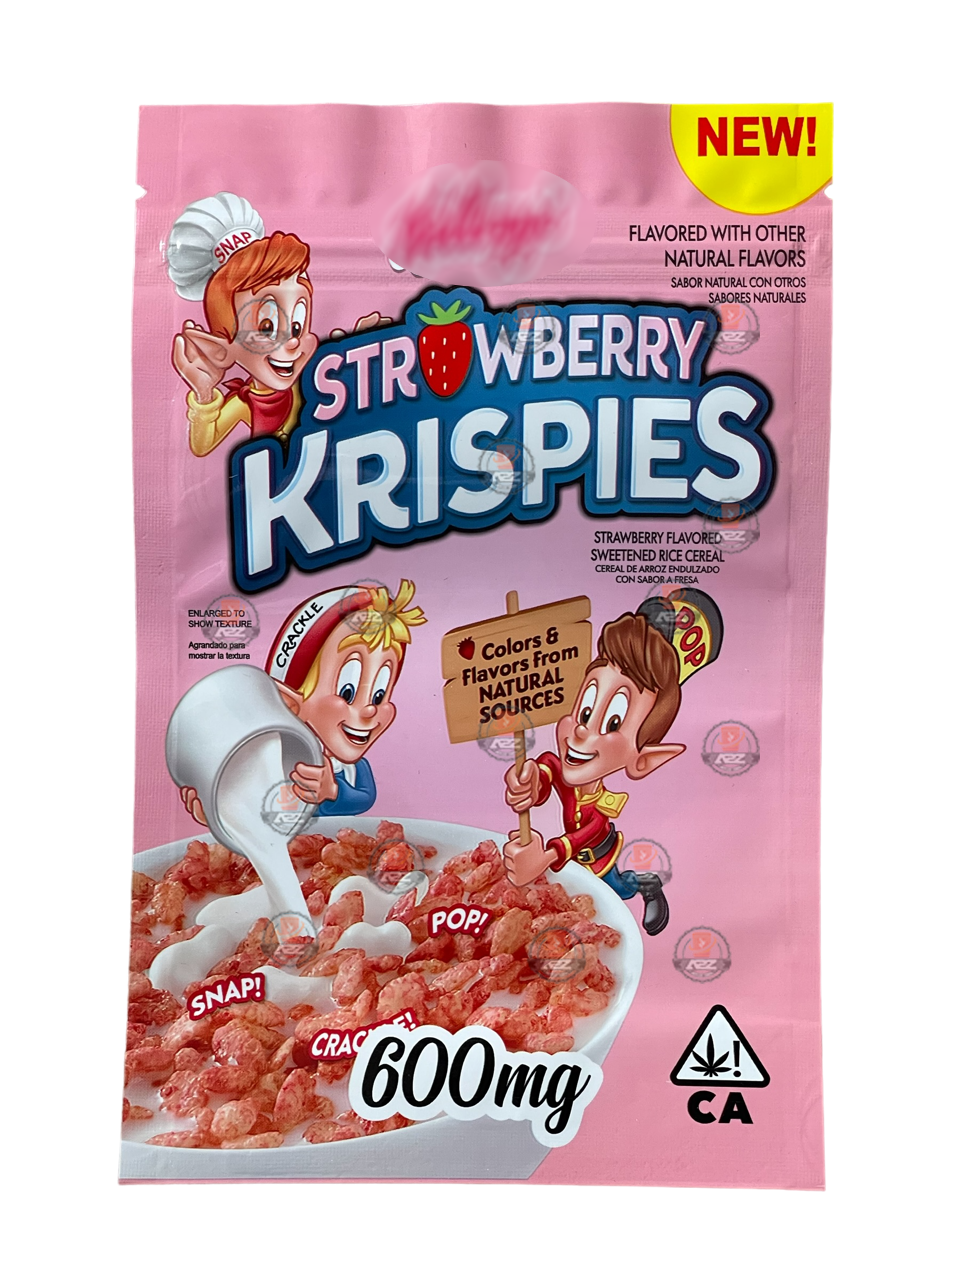 Strawberry Krispies 600mg Mylar bags Empty Packaging Only